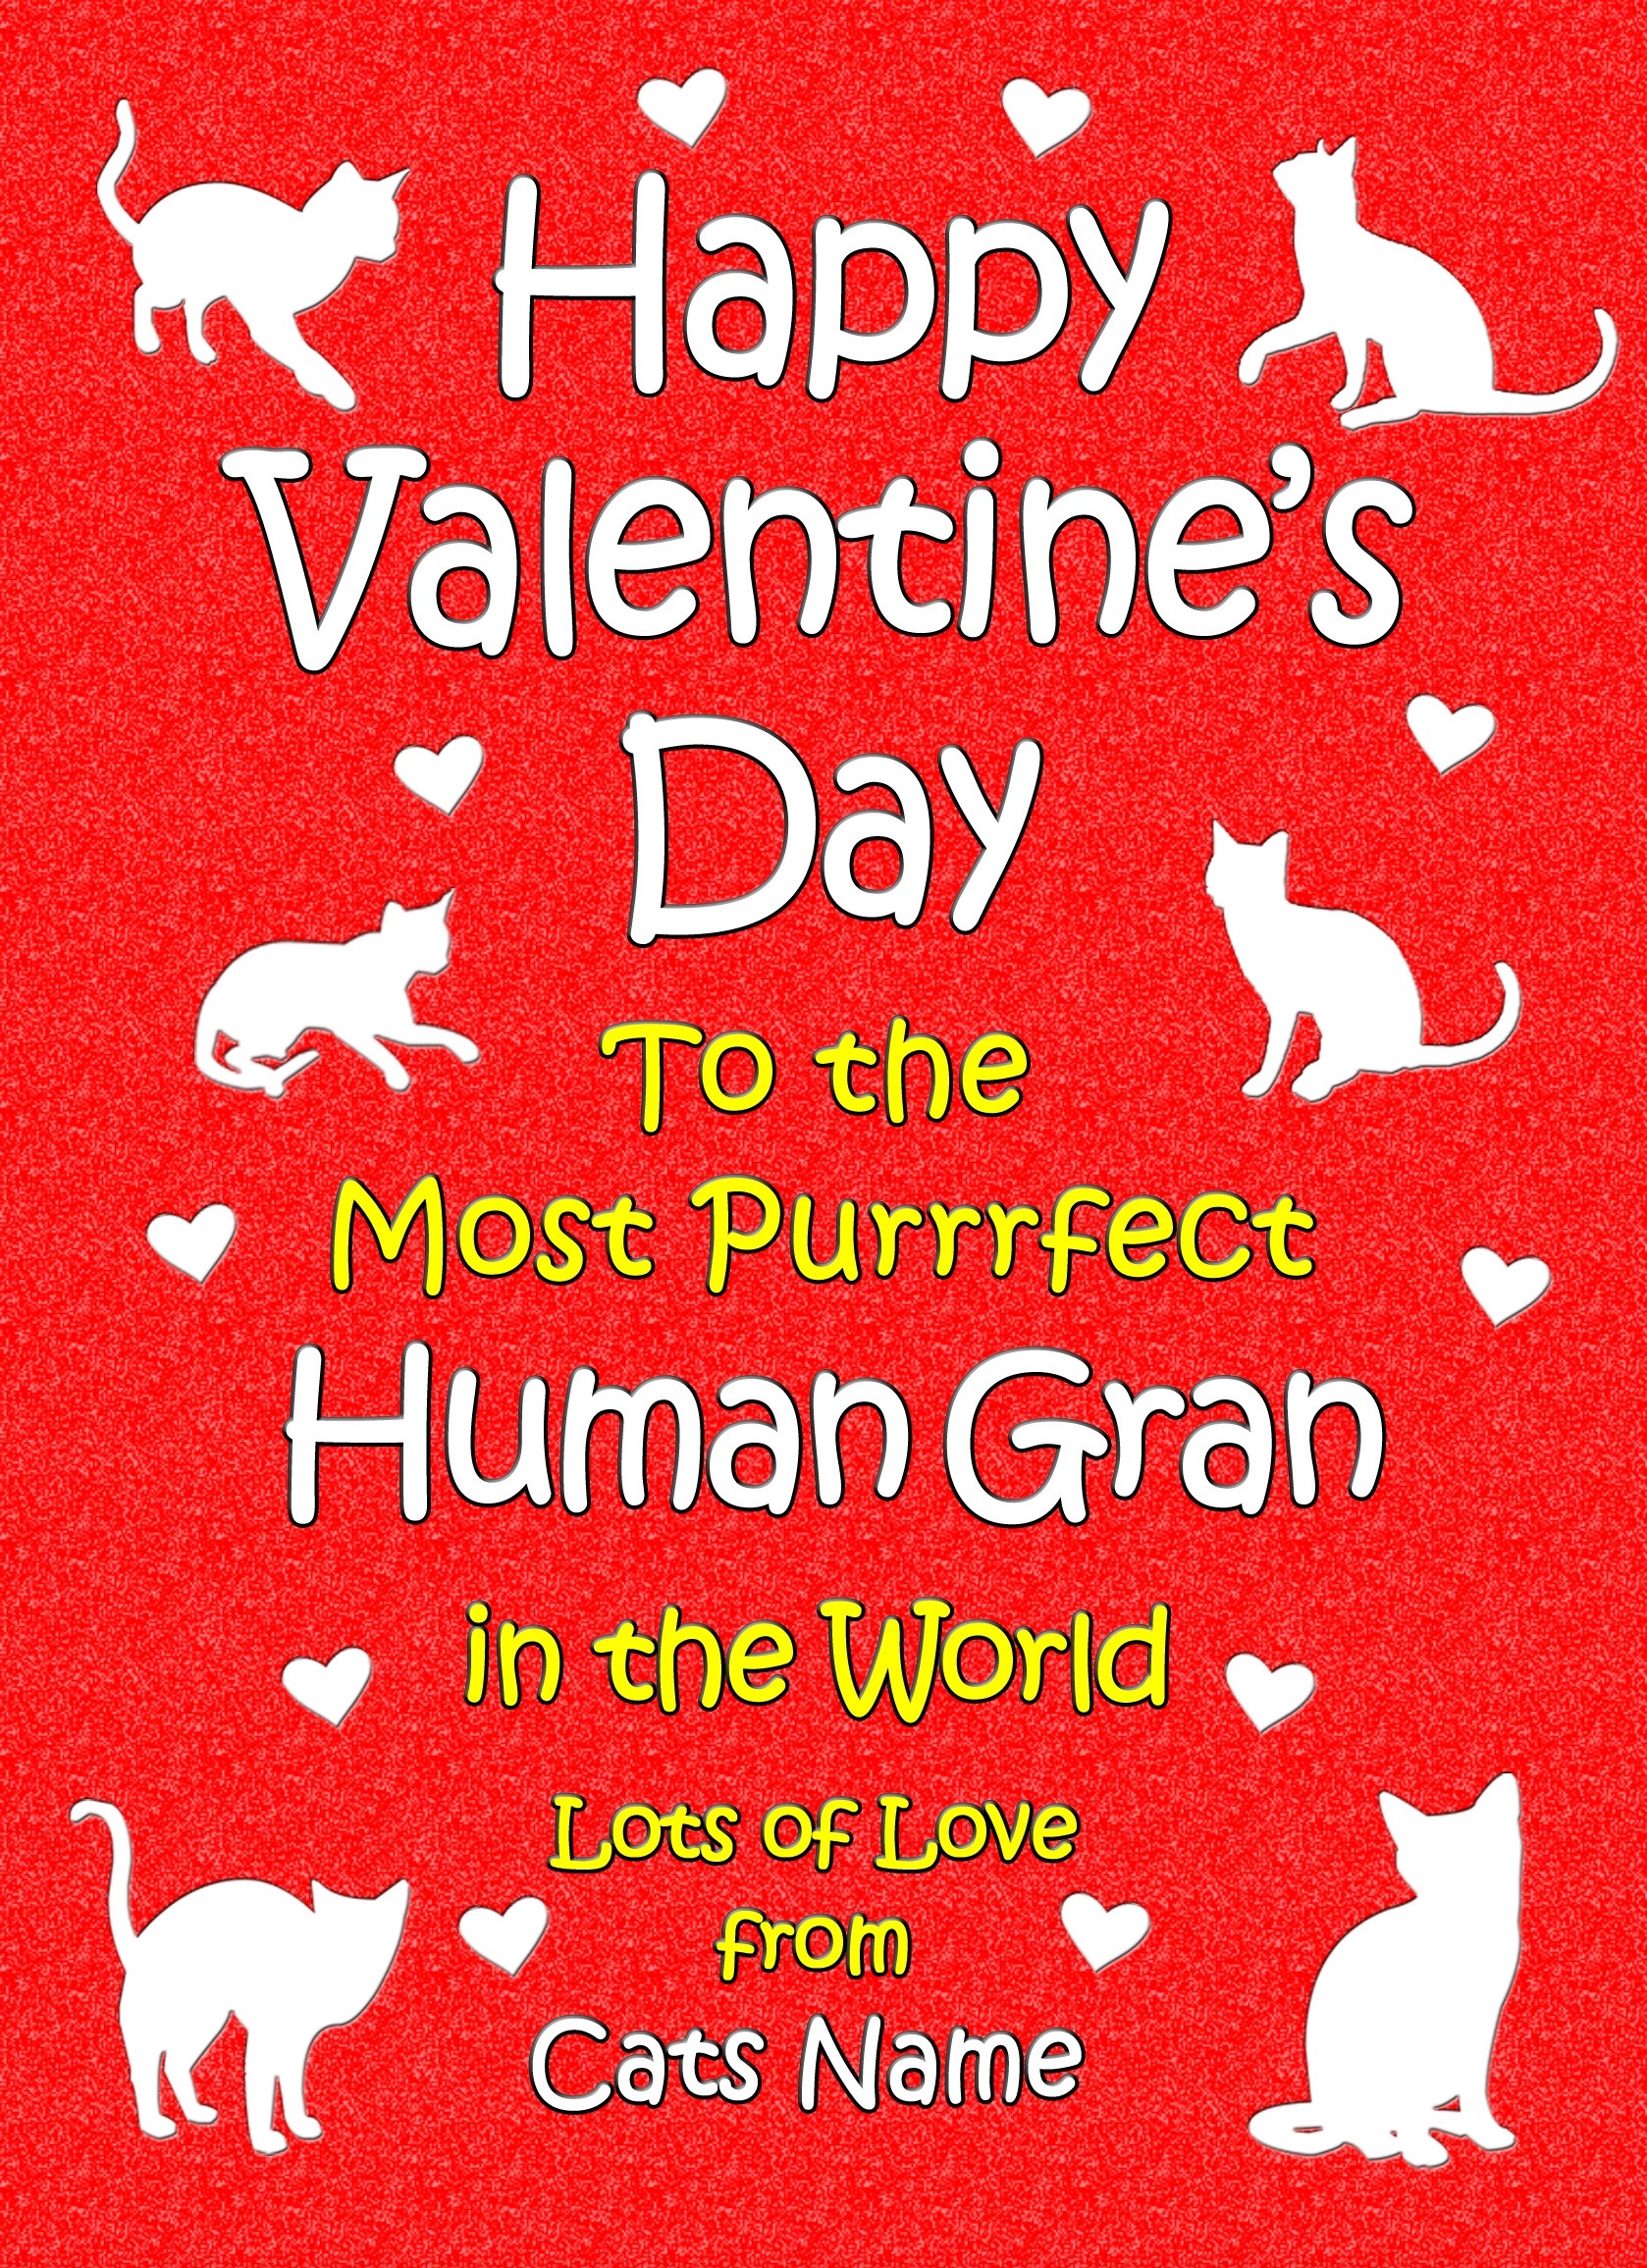 Personalised From The Cat Valentines Day Card (Human Gran)